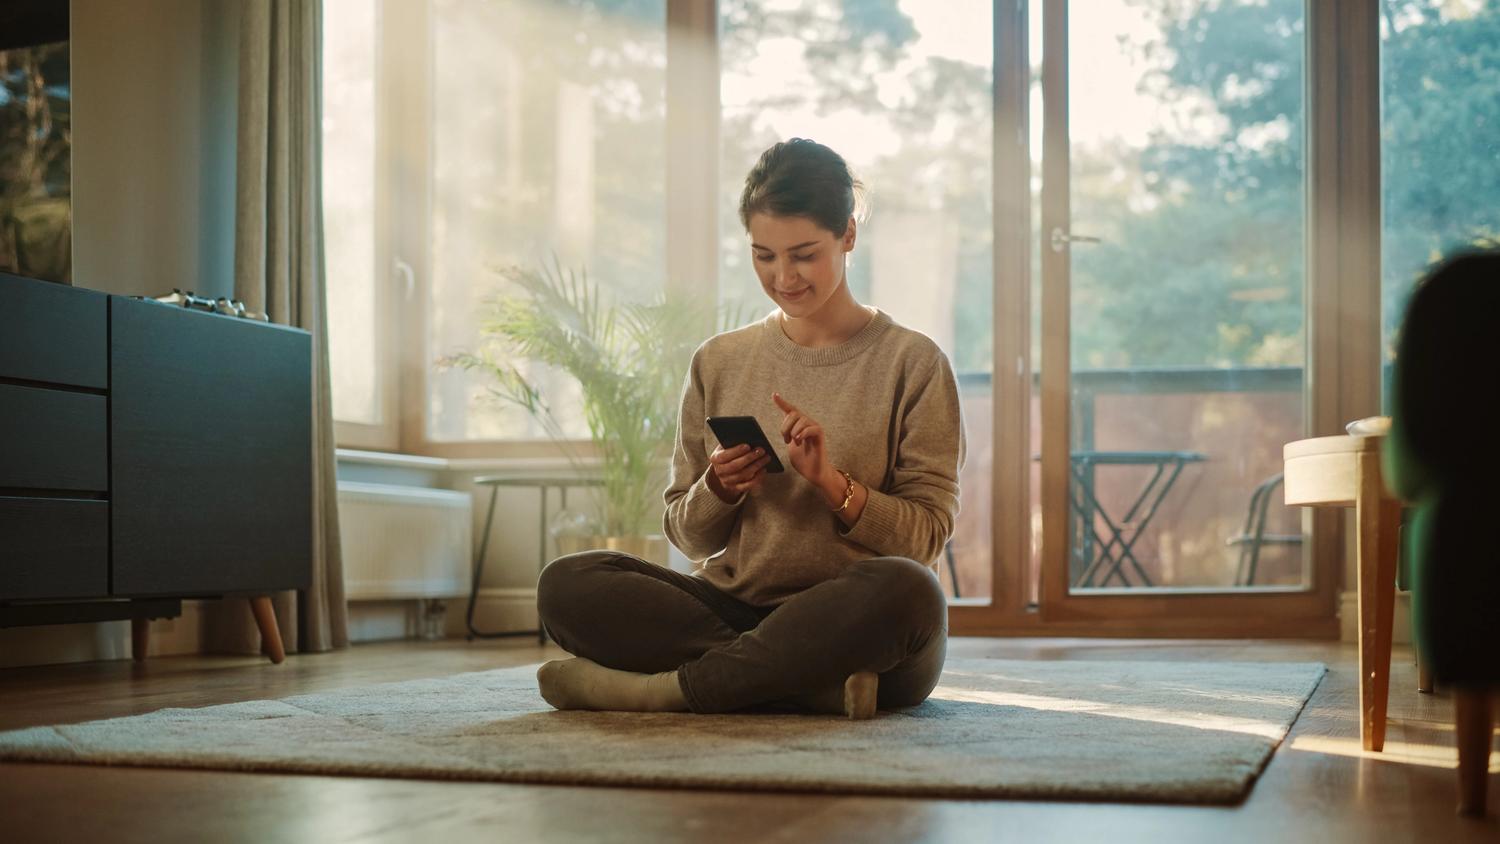 Woman smiling at phone while sitting on rug